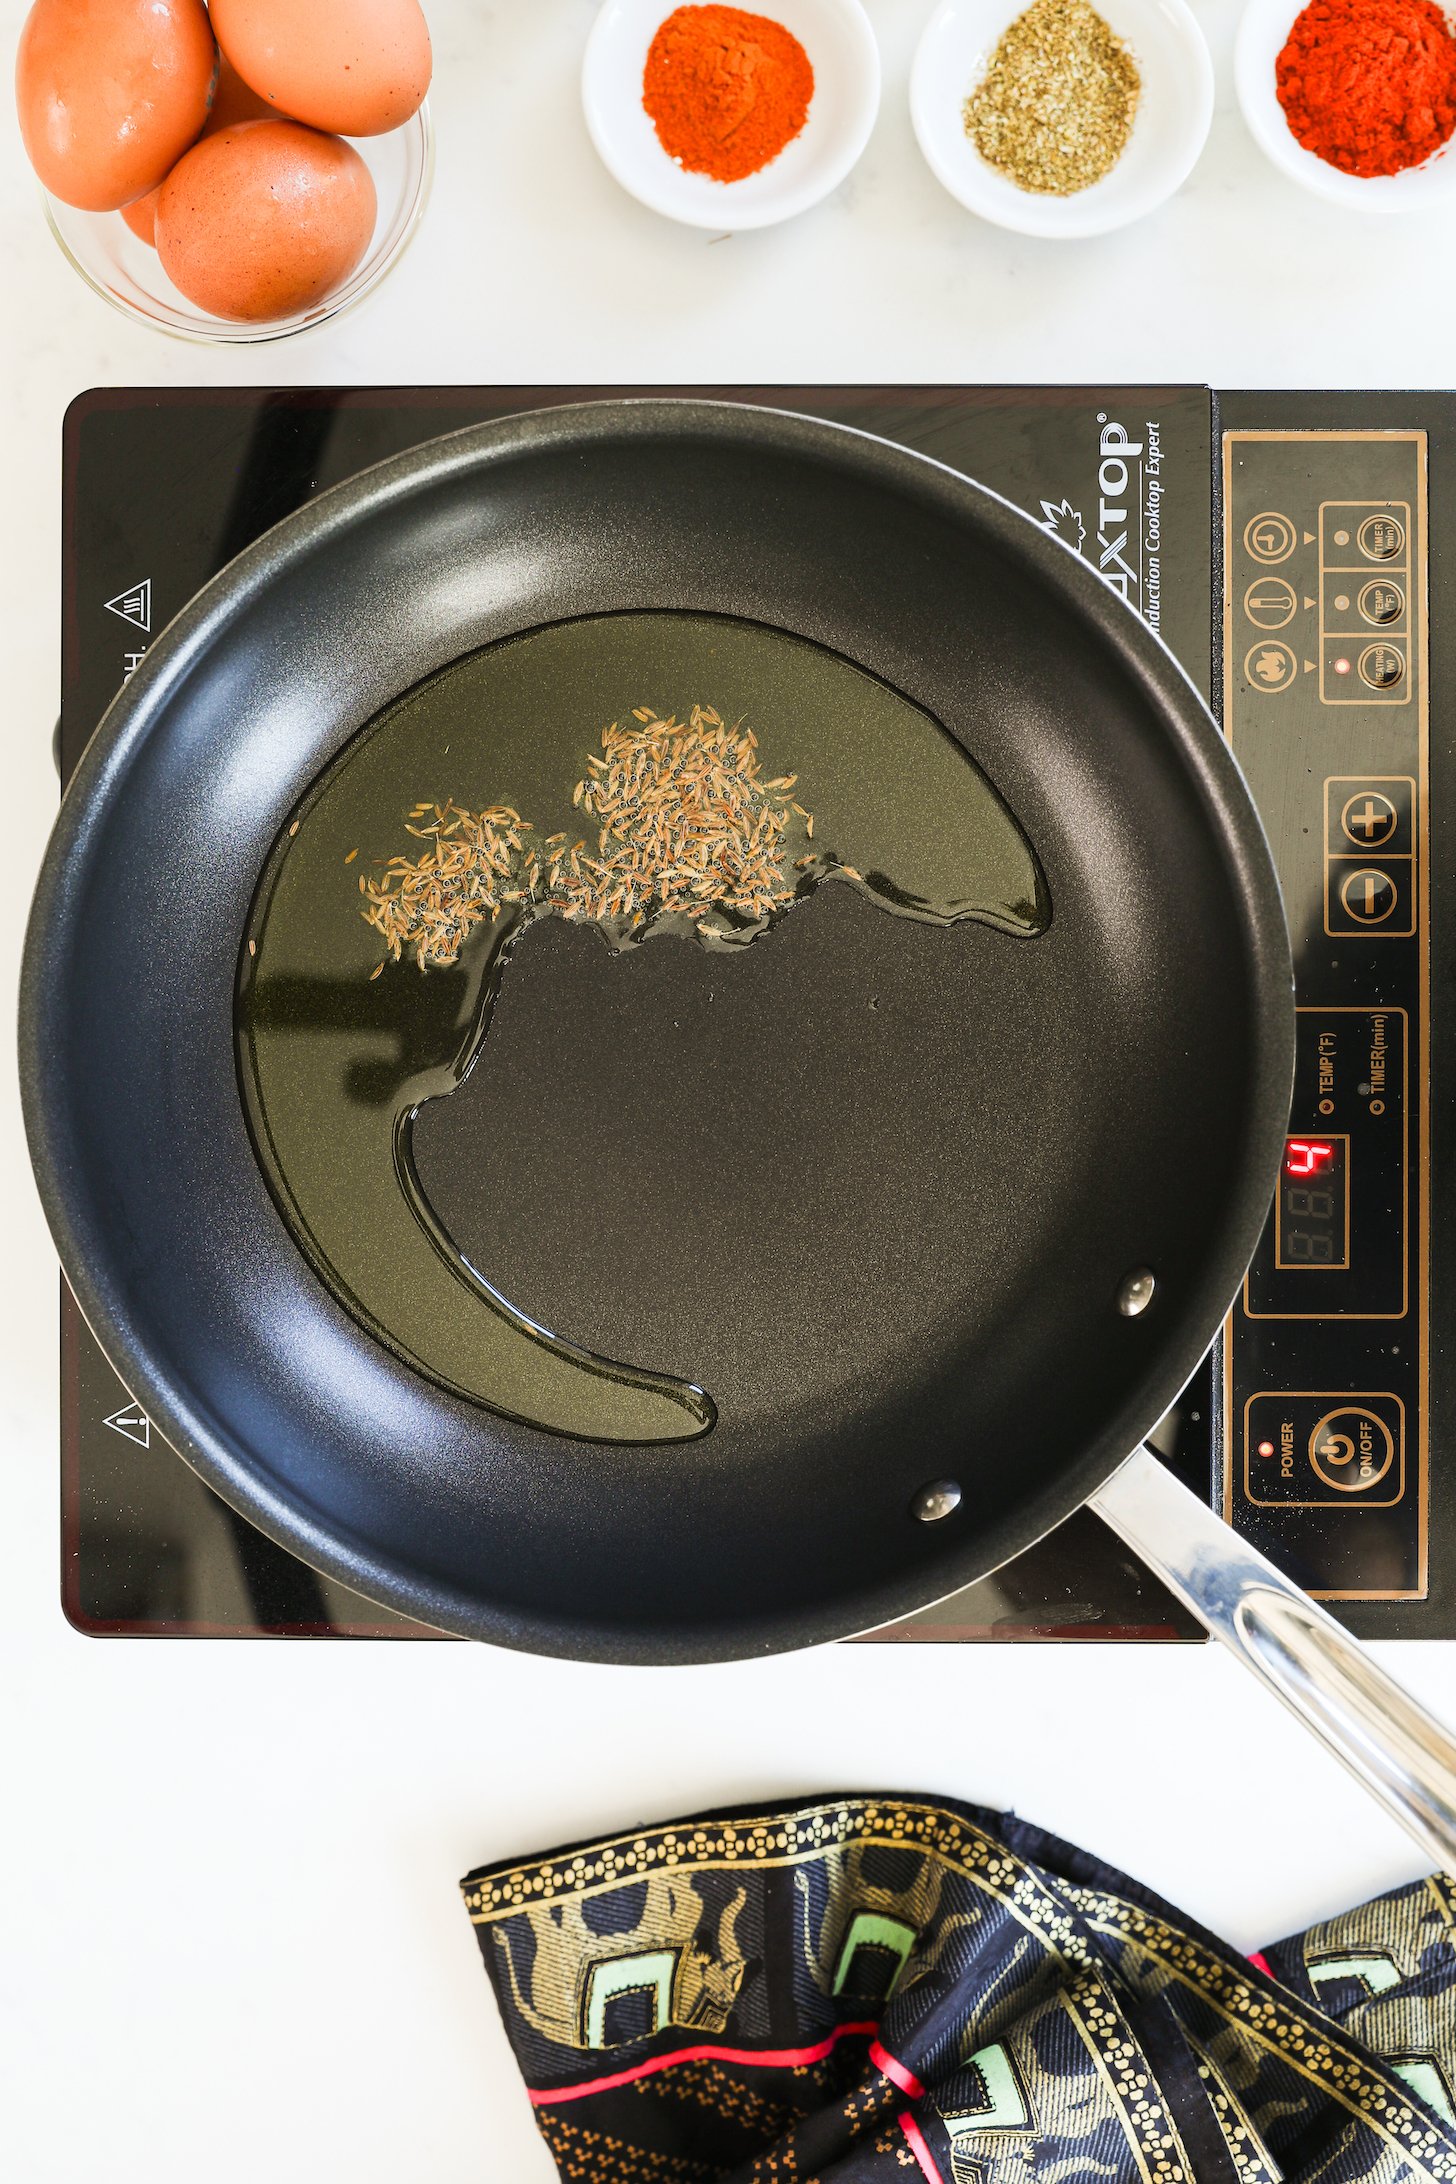 A pan with cumin frying in oil on a mobile cooktop with eggs and powdered spices.